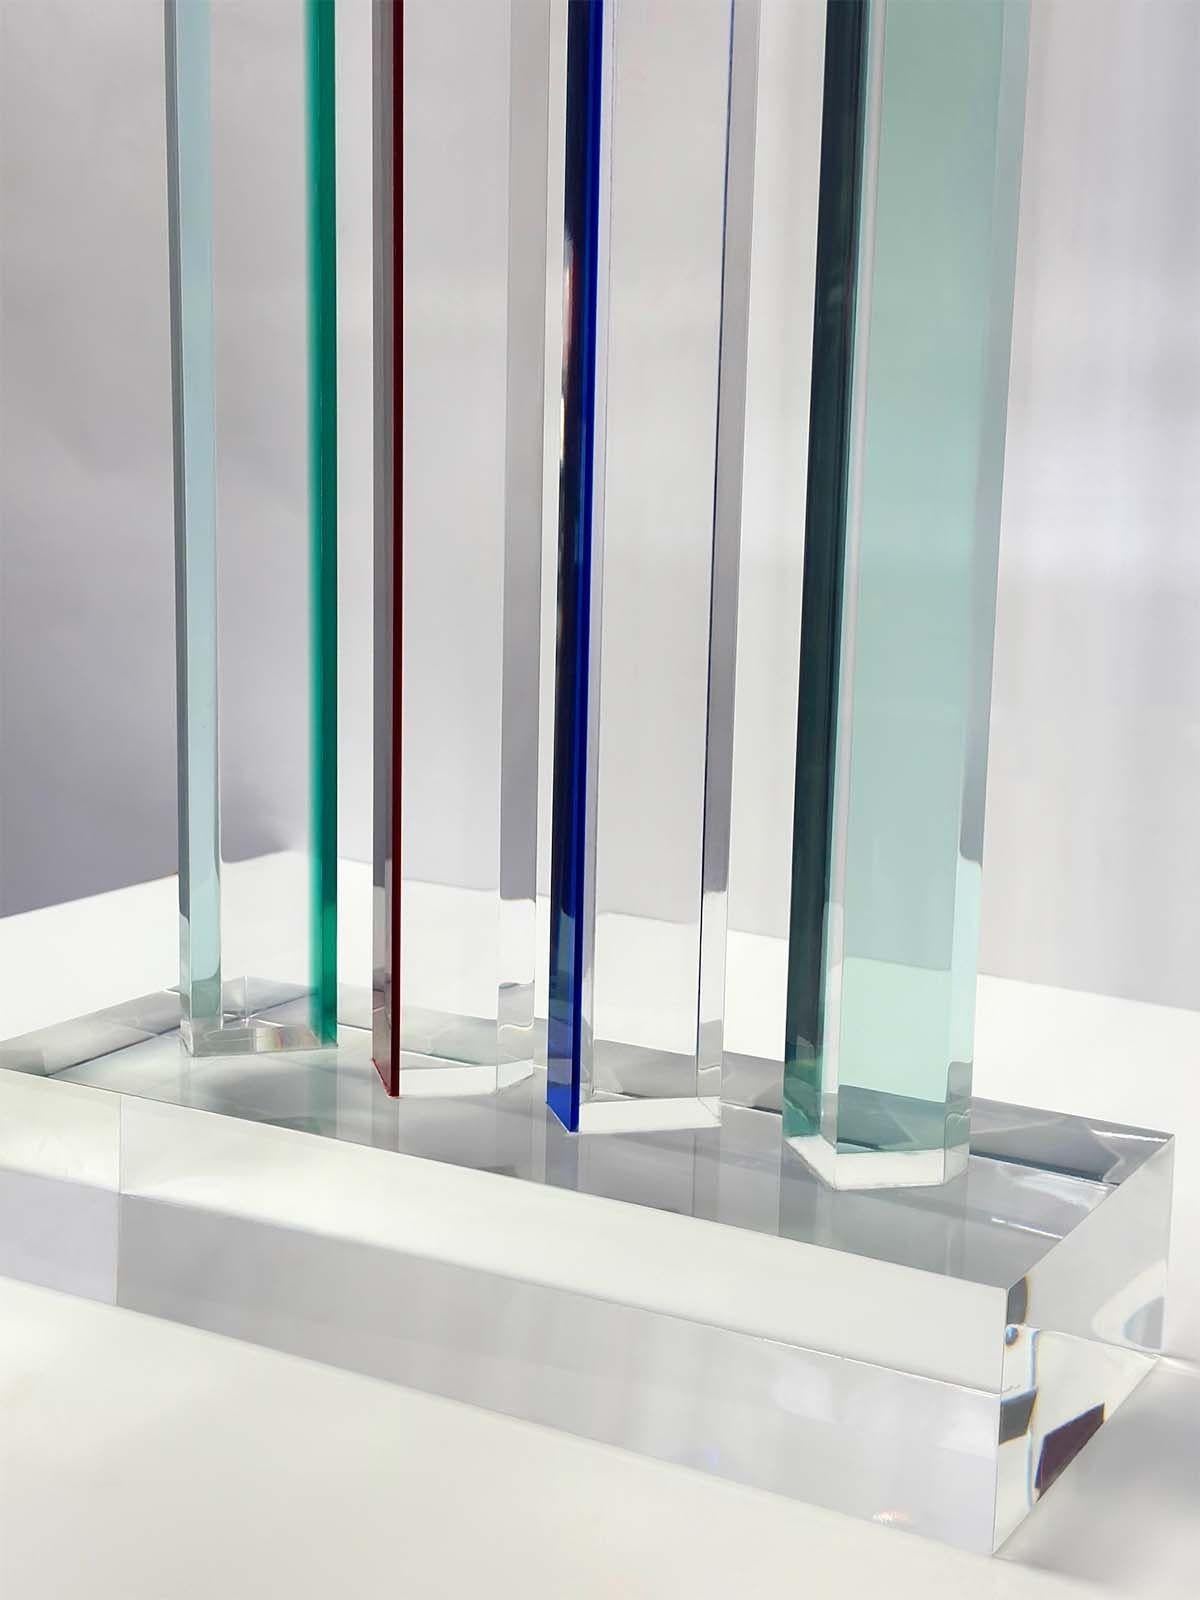 Minimalist acrylic sculpture with red and blue tones in the style of Vasa Mihich. Made in USA, c. 1990's.
Dimensions:
50.5